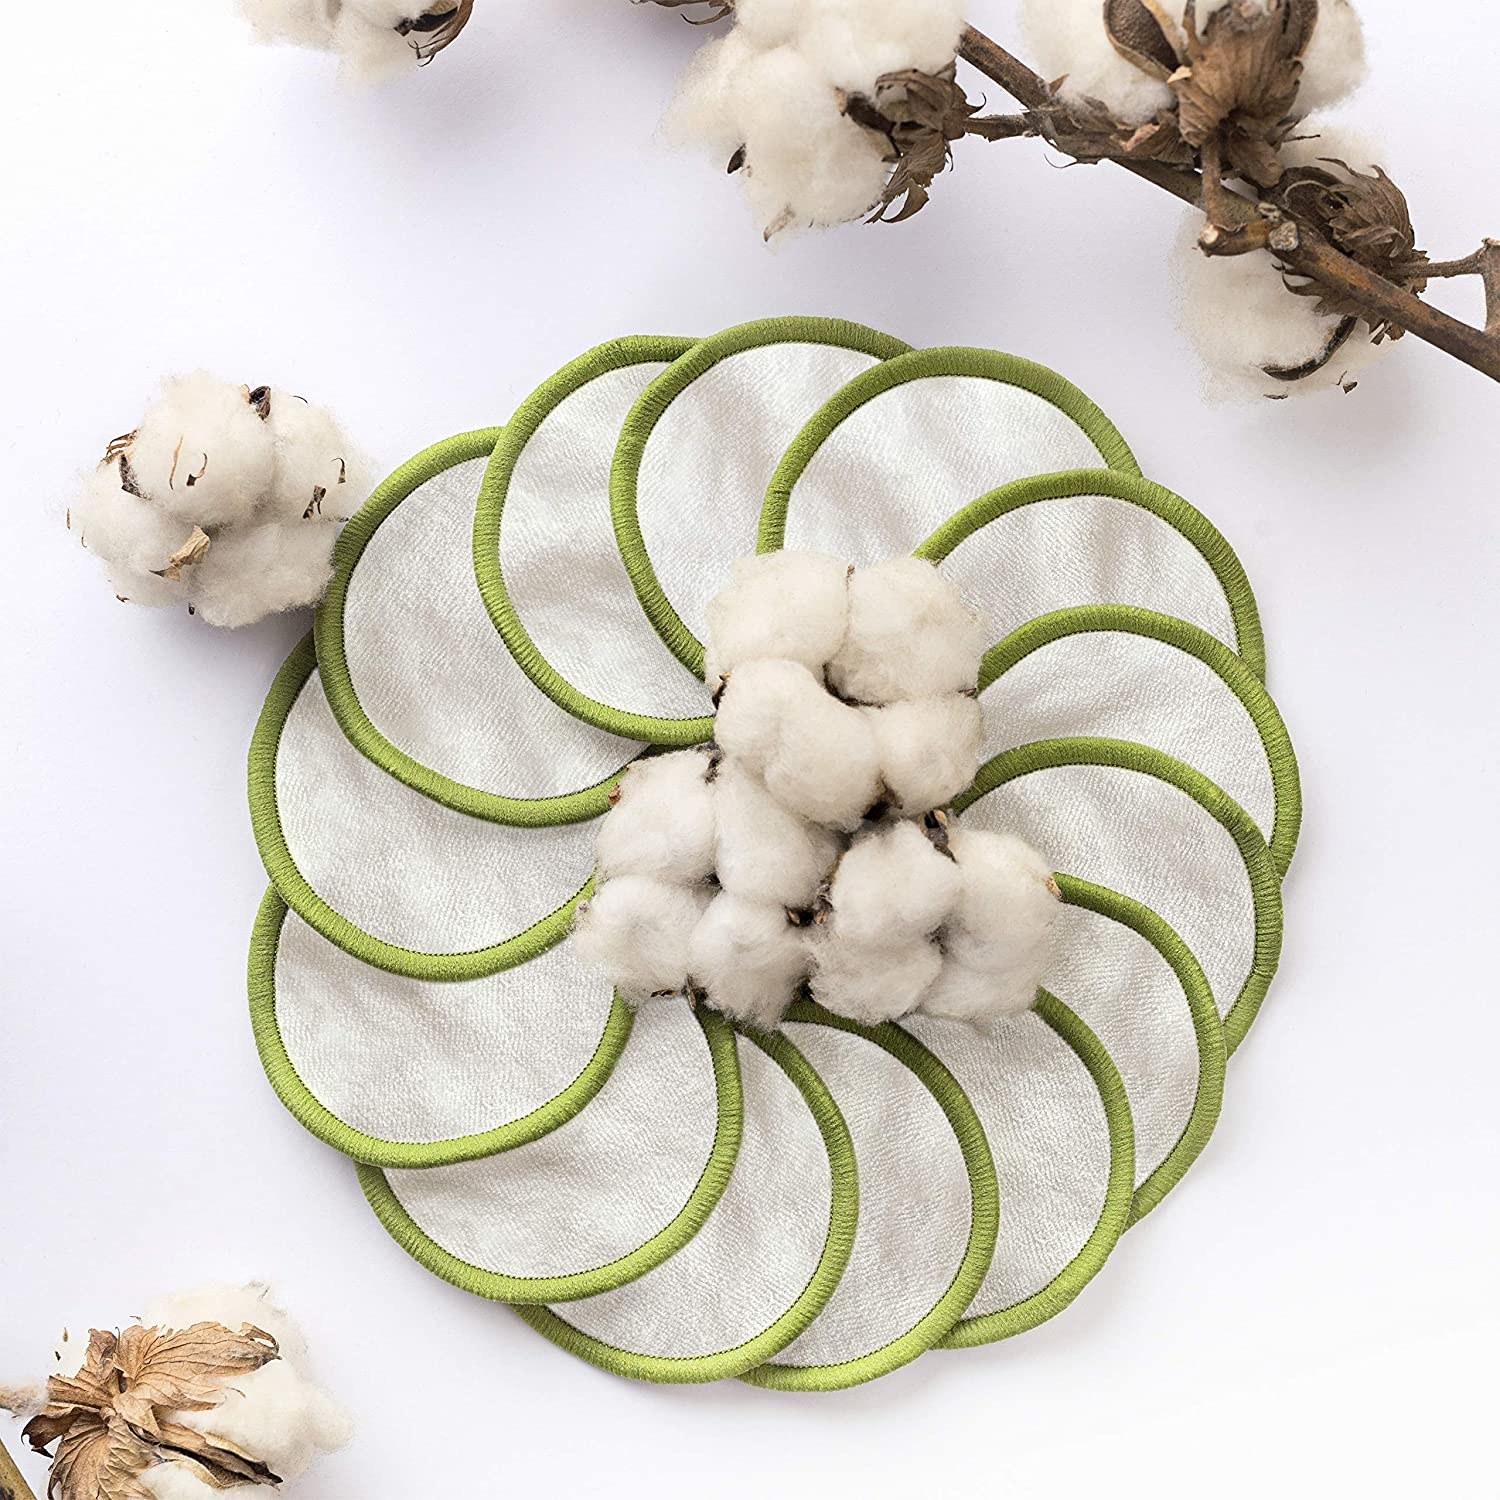 A bunch of cotton rounds in a circle with pieces of cotton plant around them